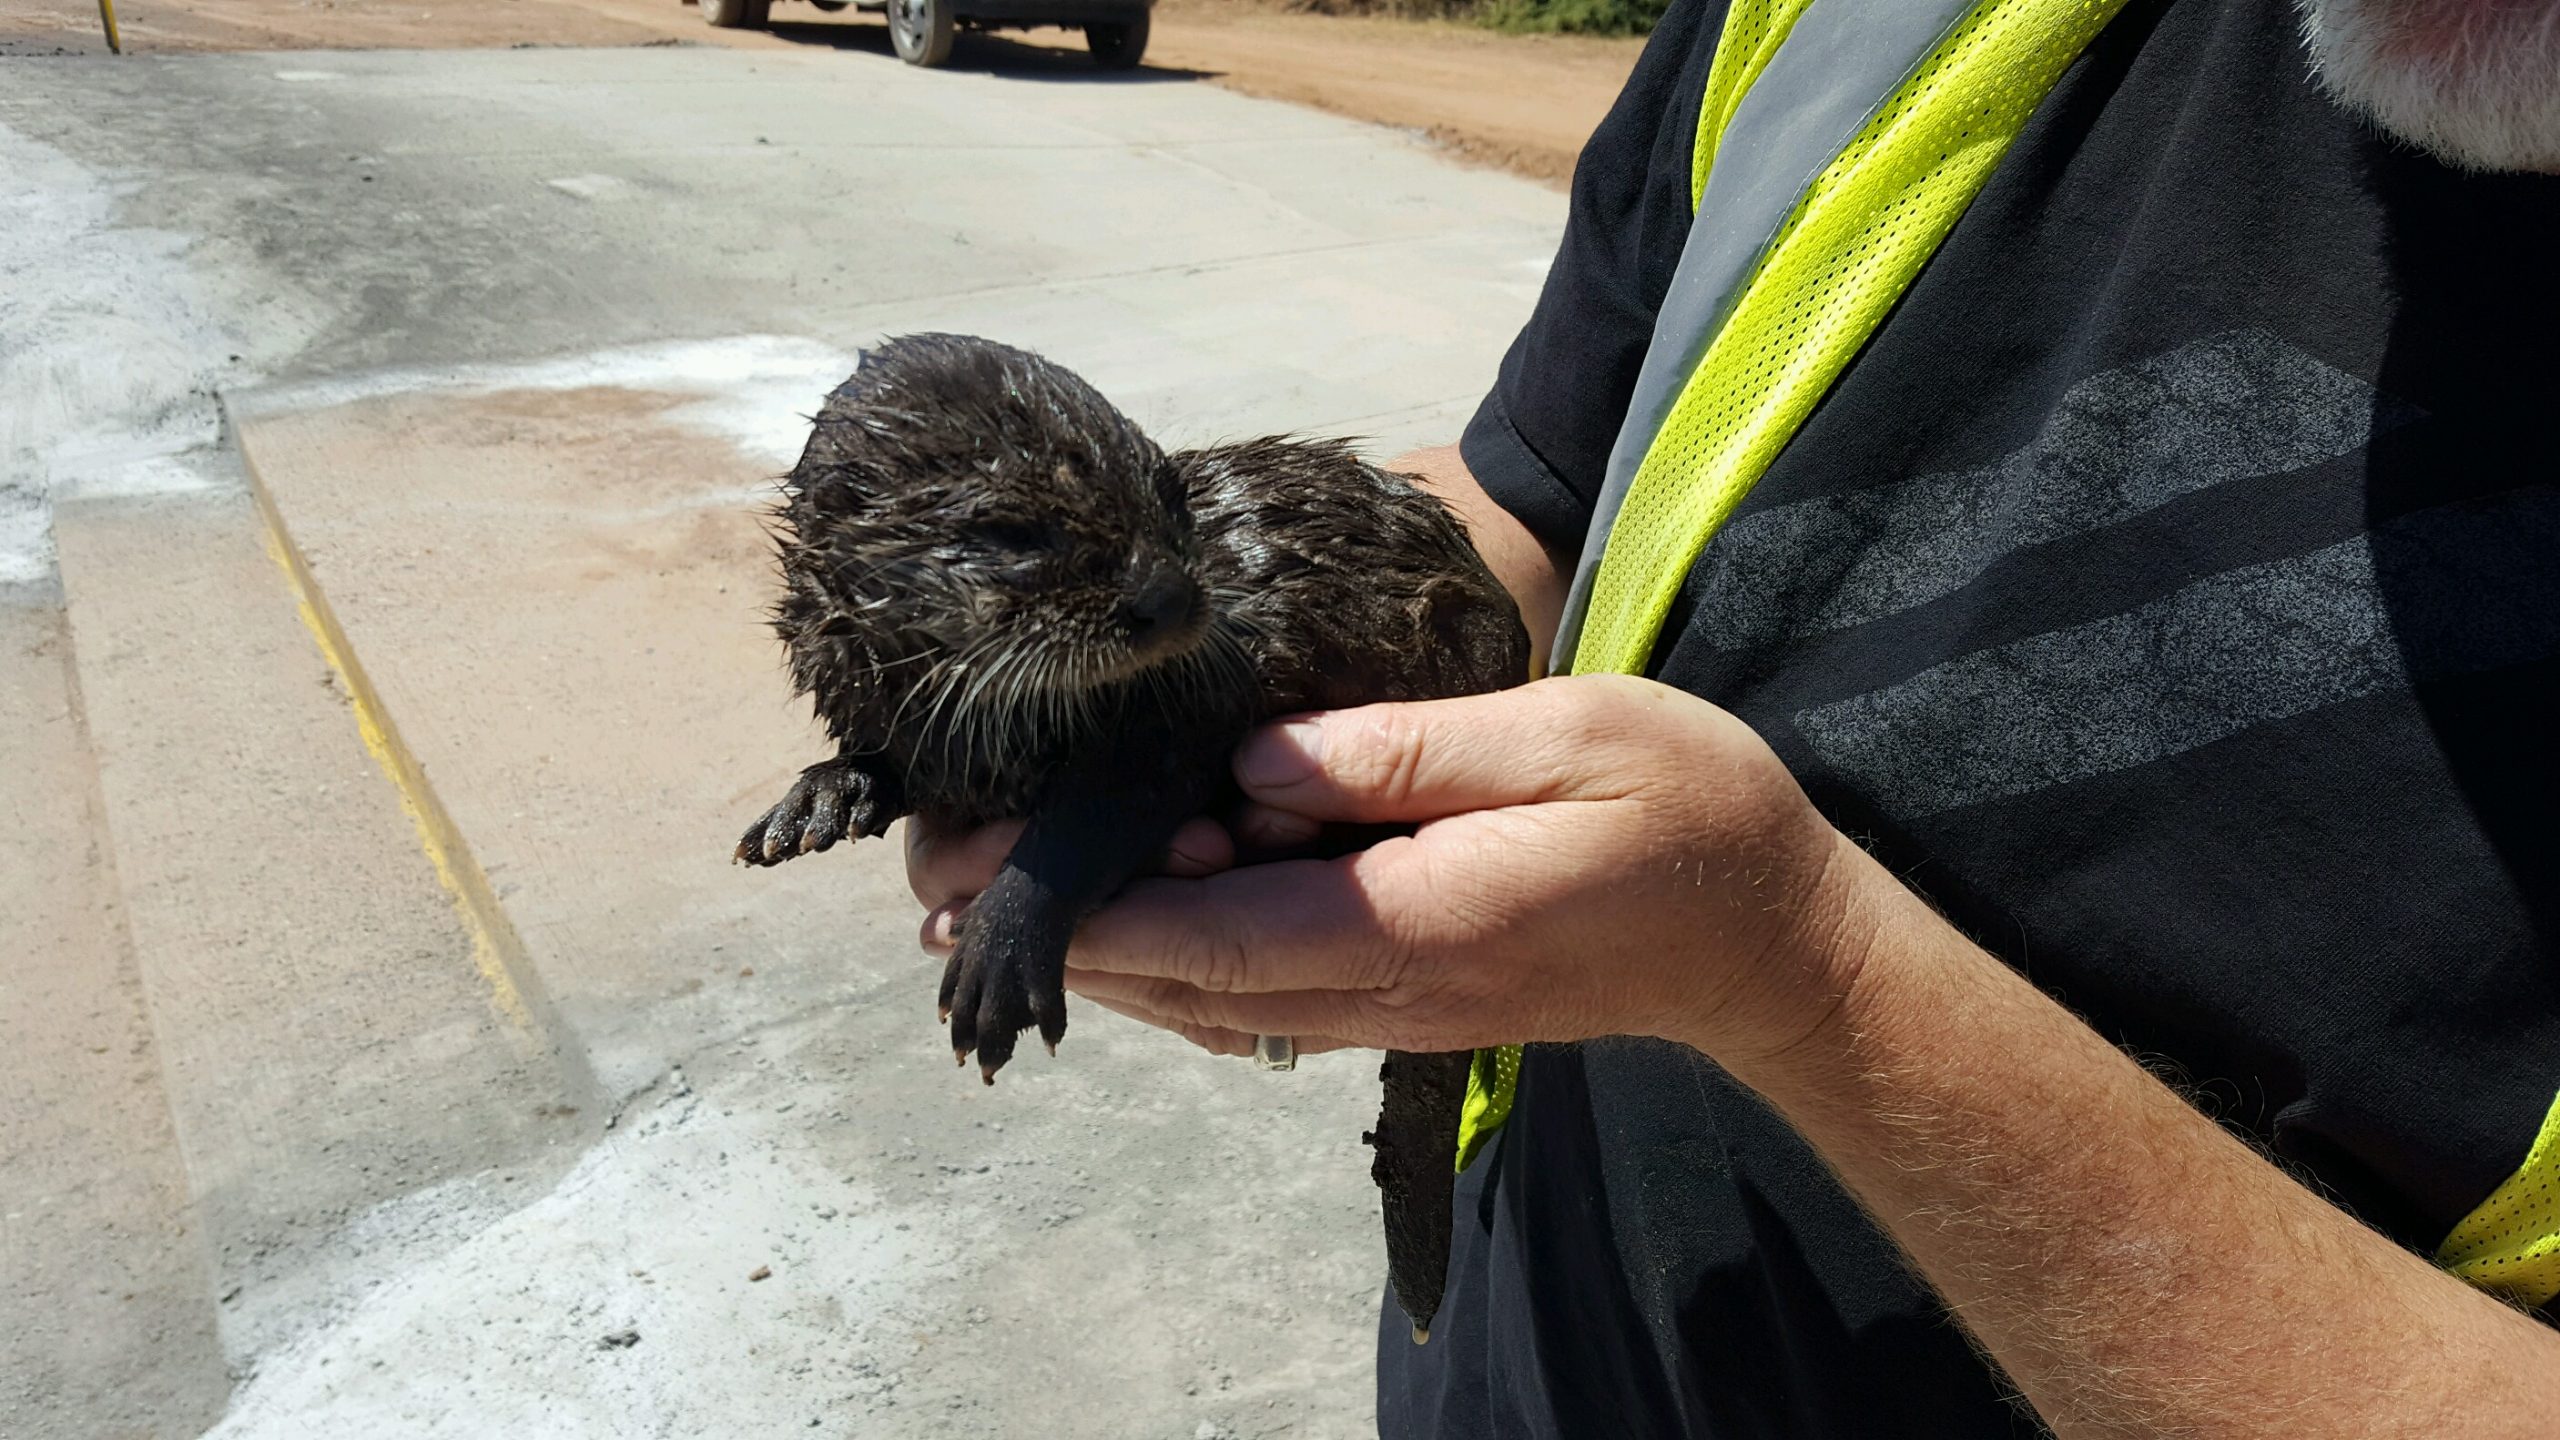 Baby otter rescued from canal.